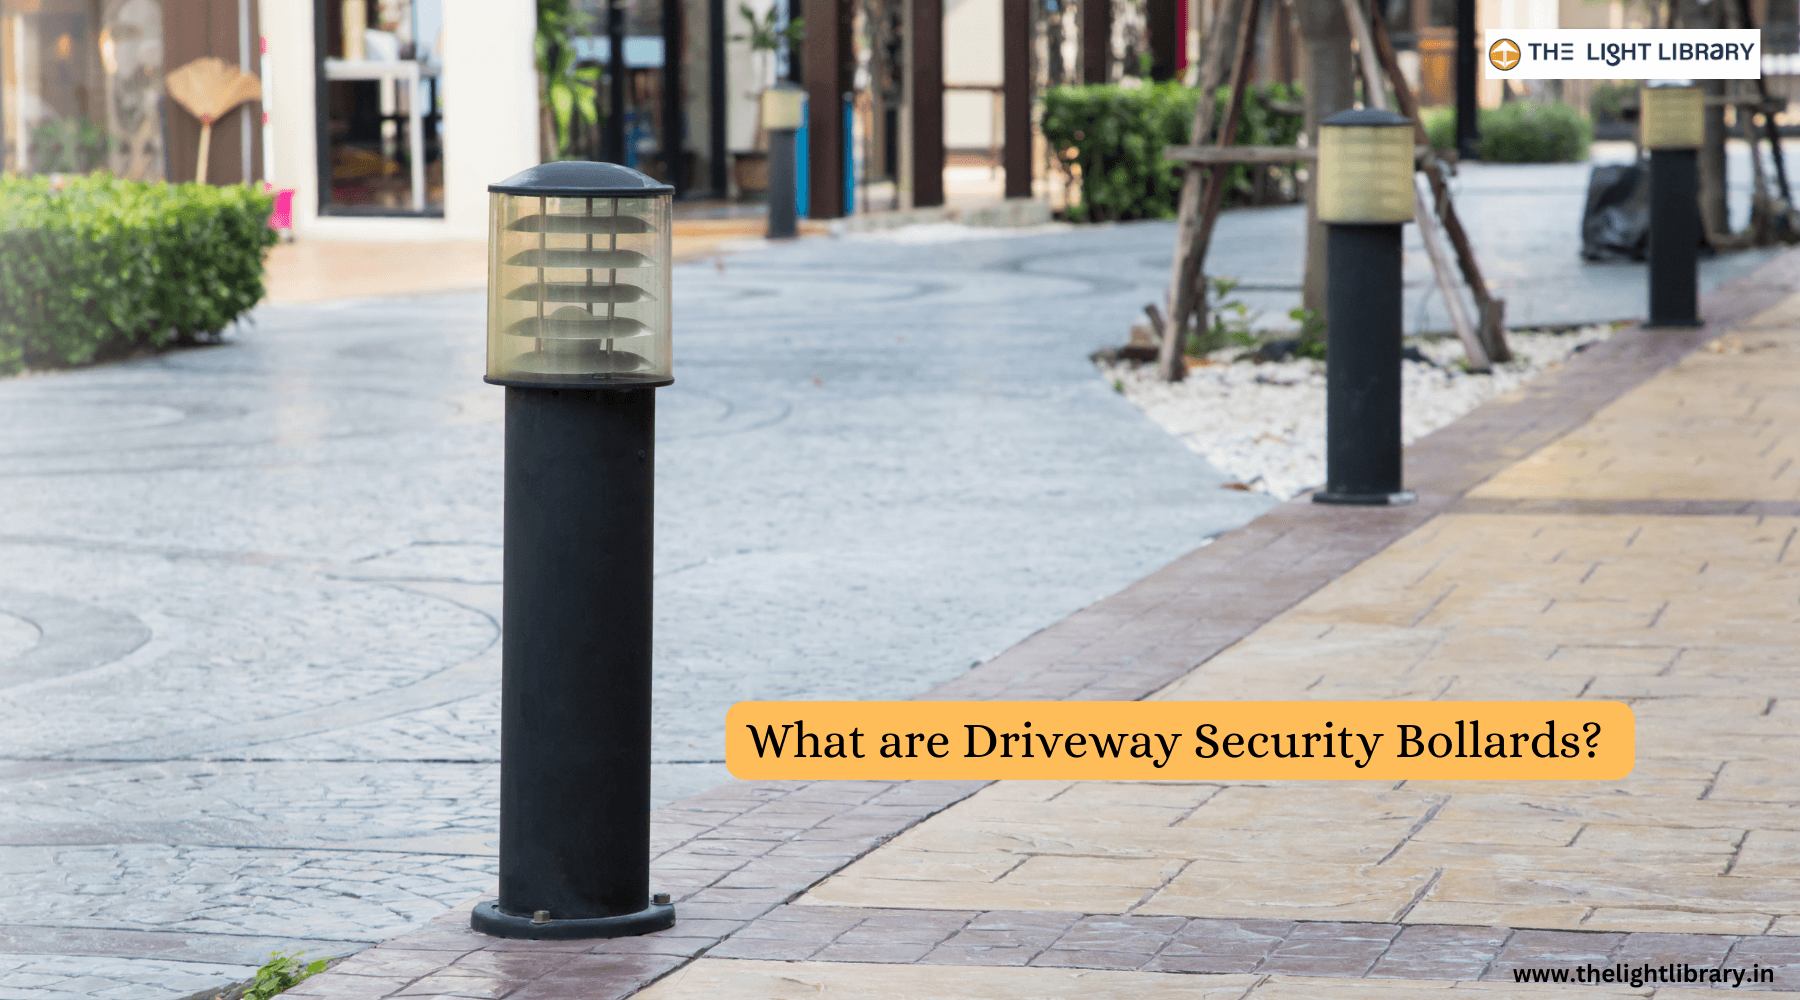 What are Driveway Security Bollards? - The Light Library